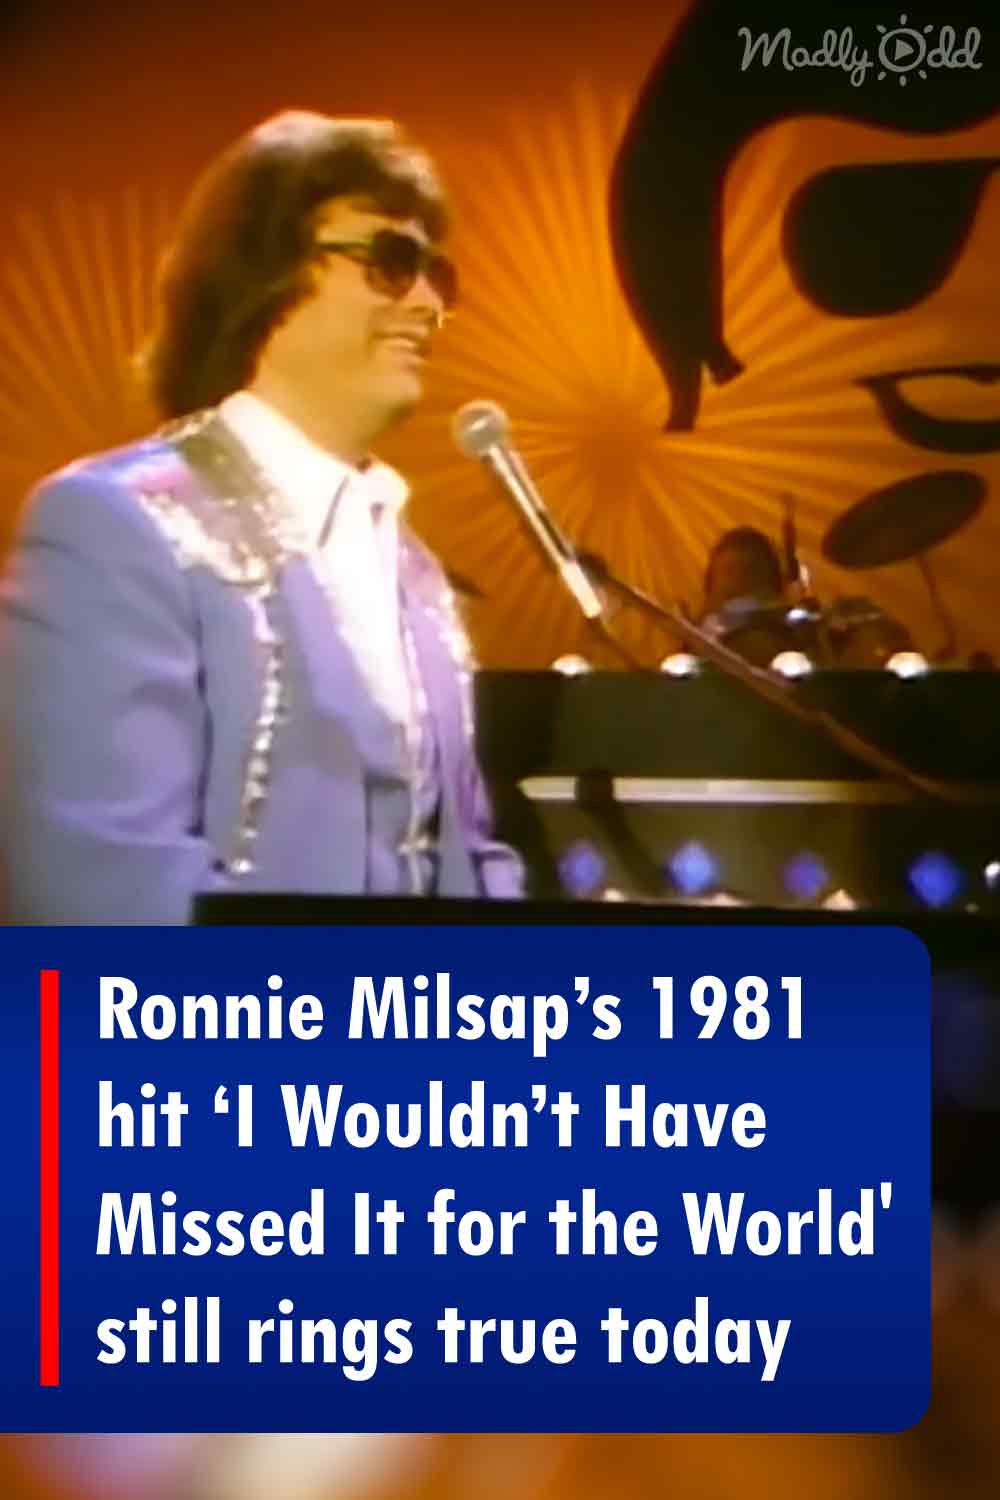 Ronnie Milsap’s 1981 hit ‘I Wouldn’t Have Missed It for the World\' still rings true today